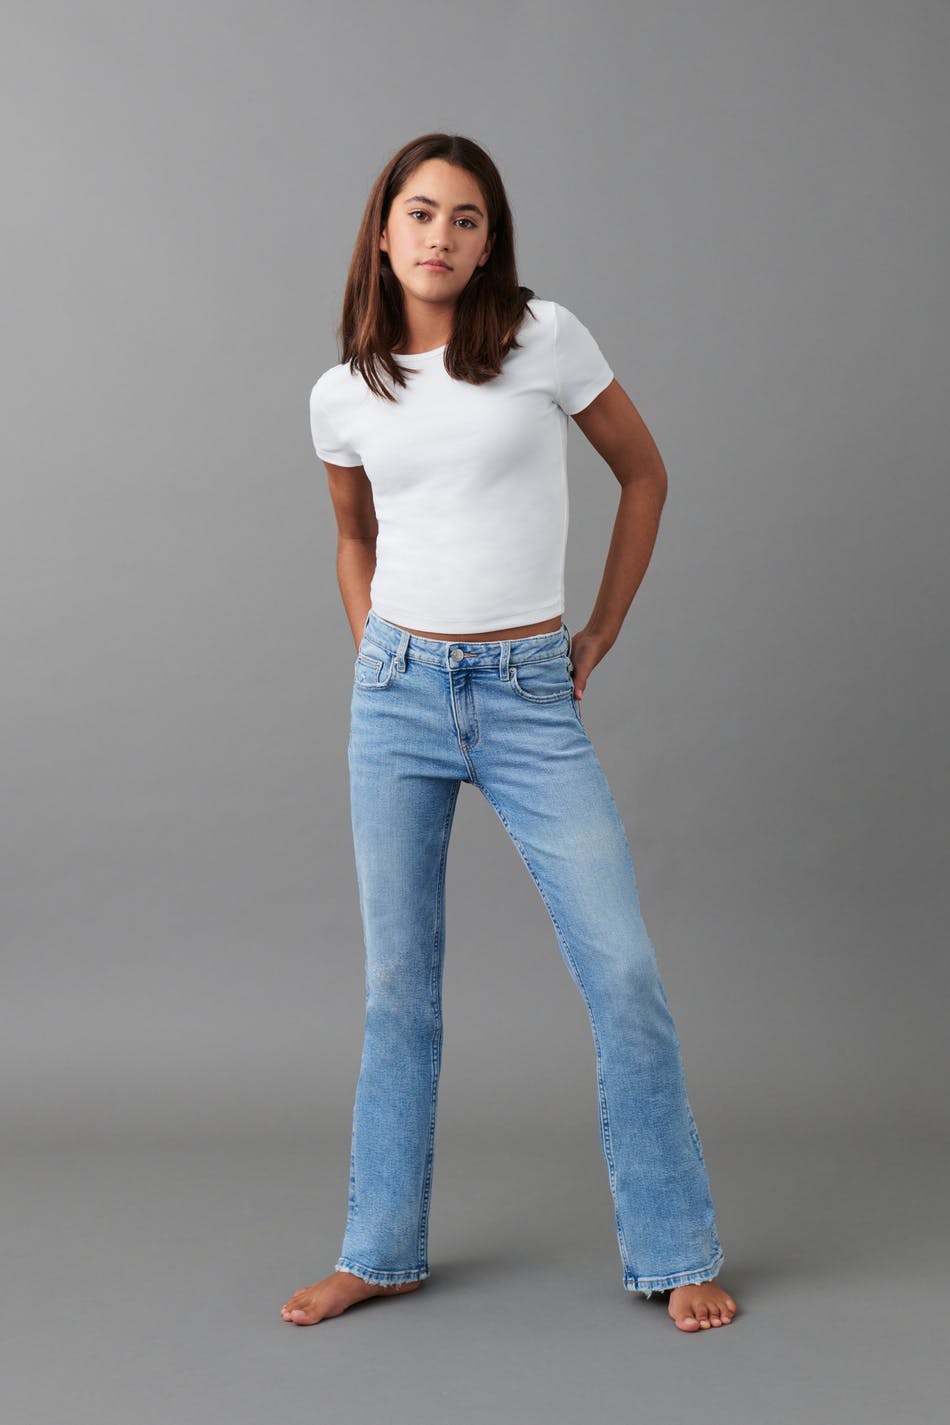 Gina Tricot - Bootcut jeans tall - bootcut - Blue - 140 - Female